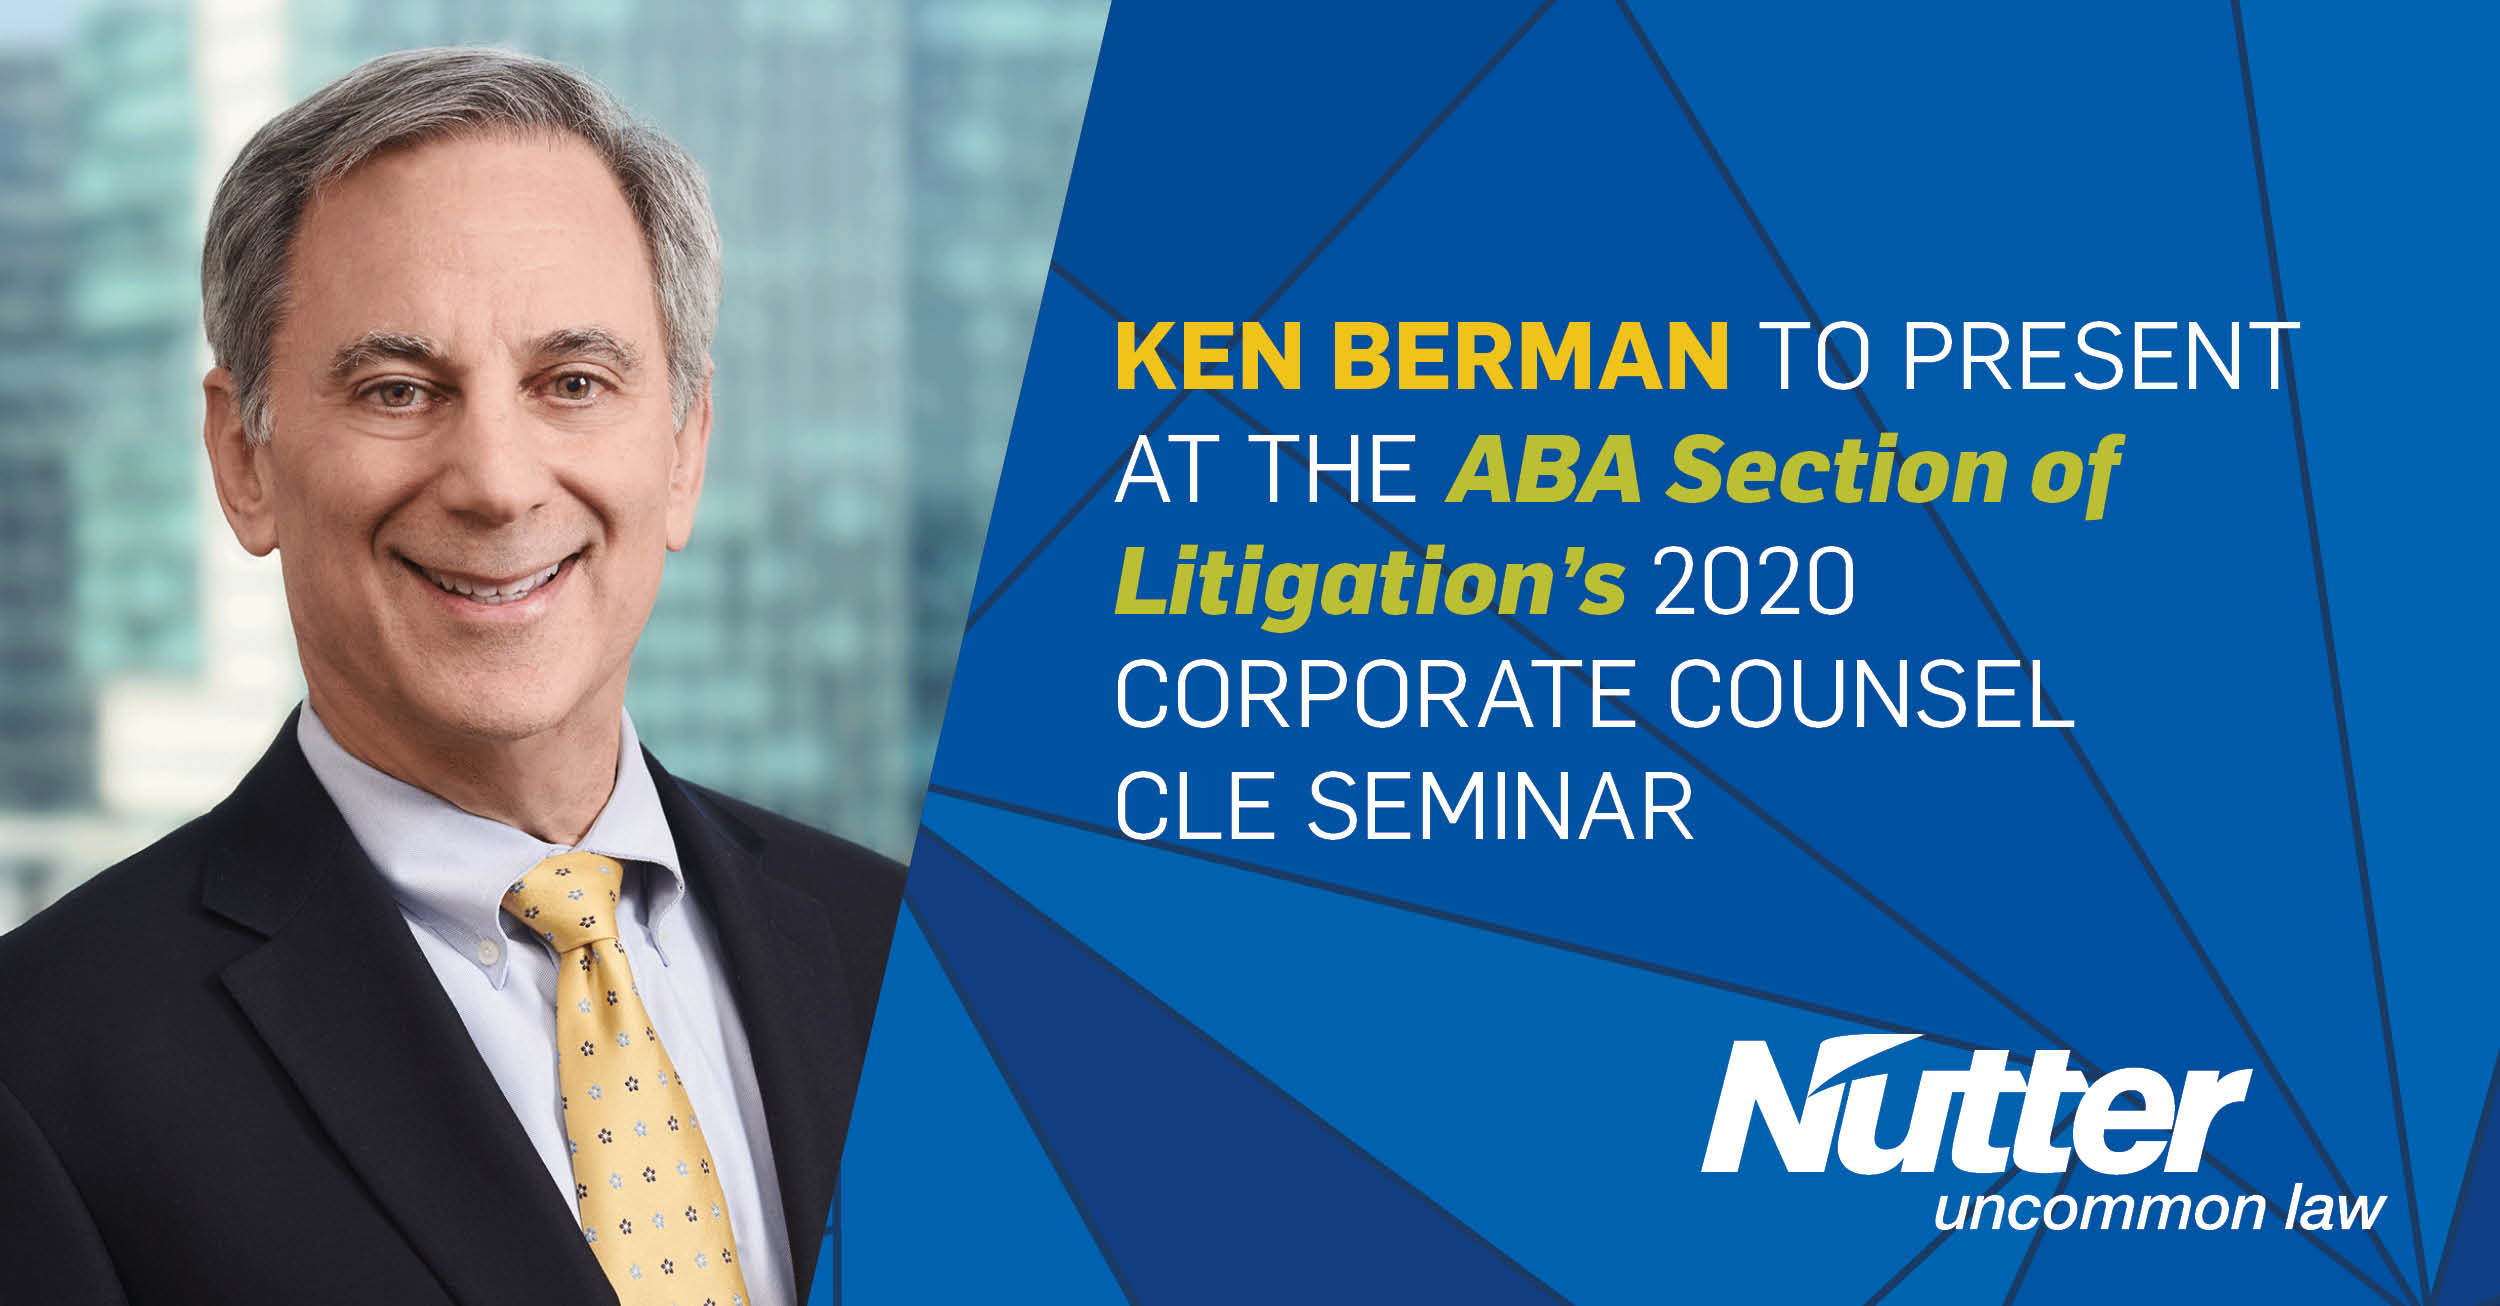 Ken Berman to Present at the ABA Section of Litigation’s 2020 Corporate